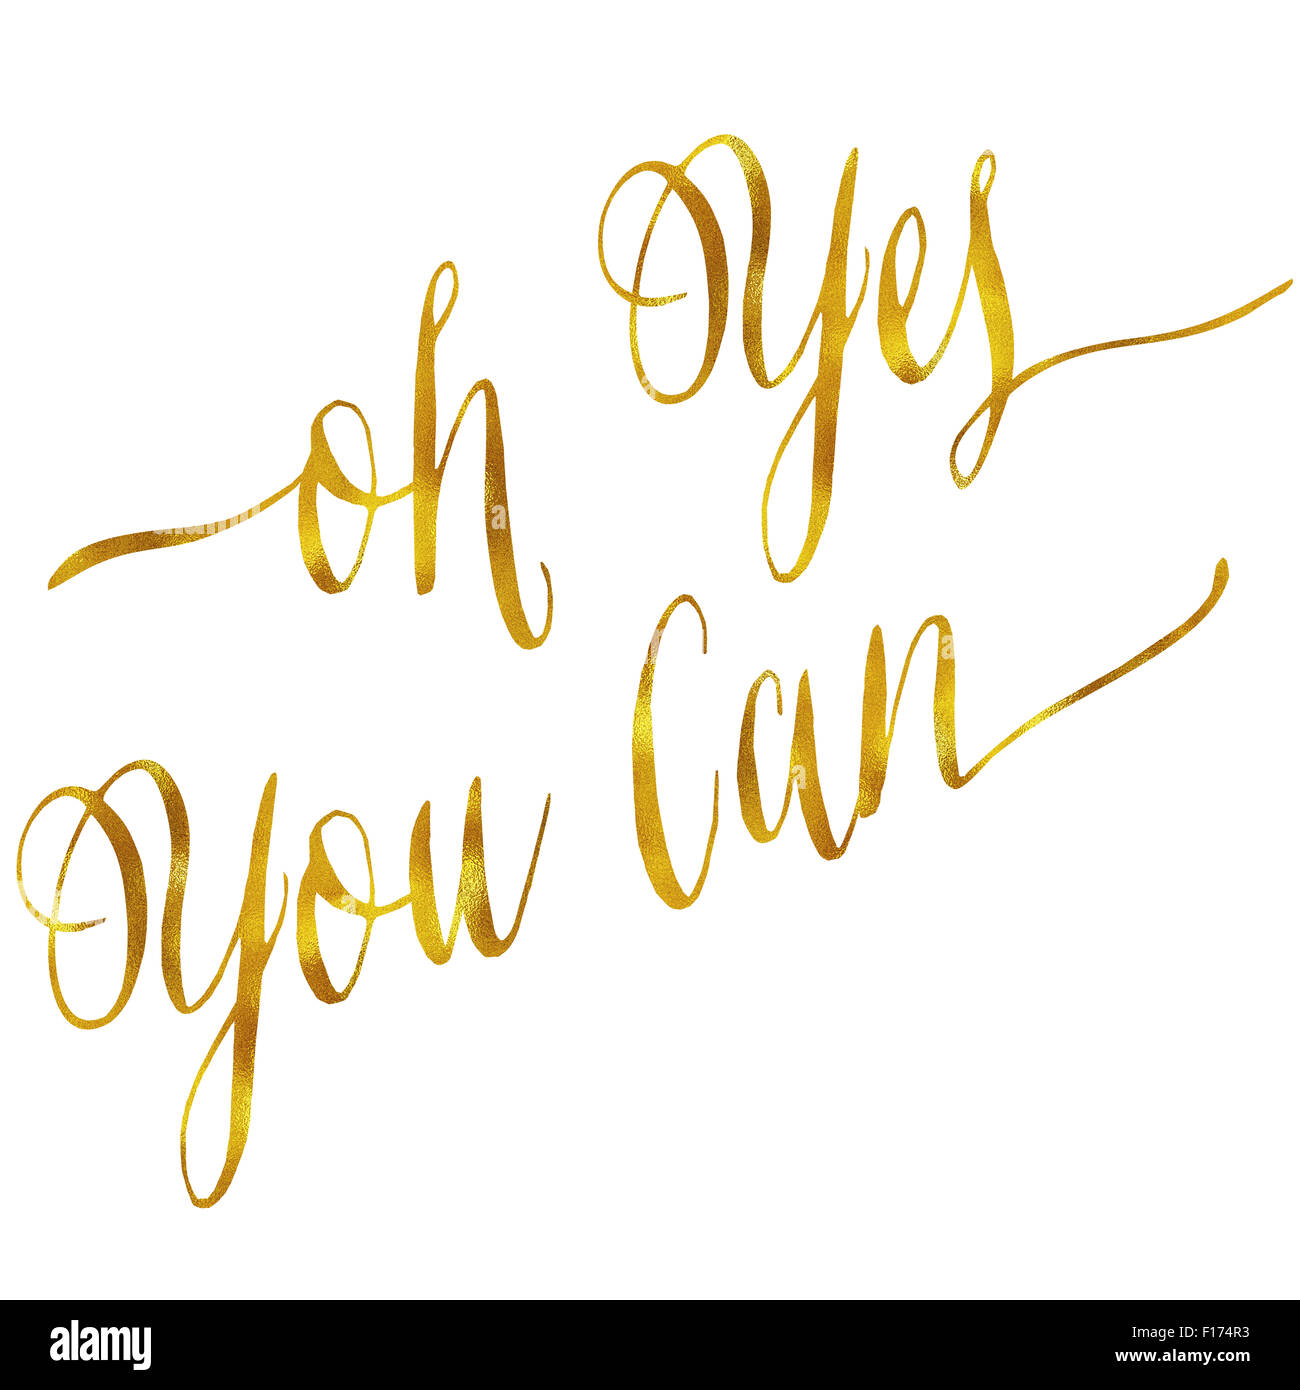 Oh Yes You Can Motivational Gold Faux Foil Metallic Glitter Inspirational Quote Isolated Stock Photo